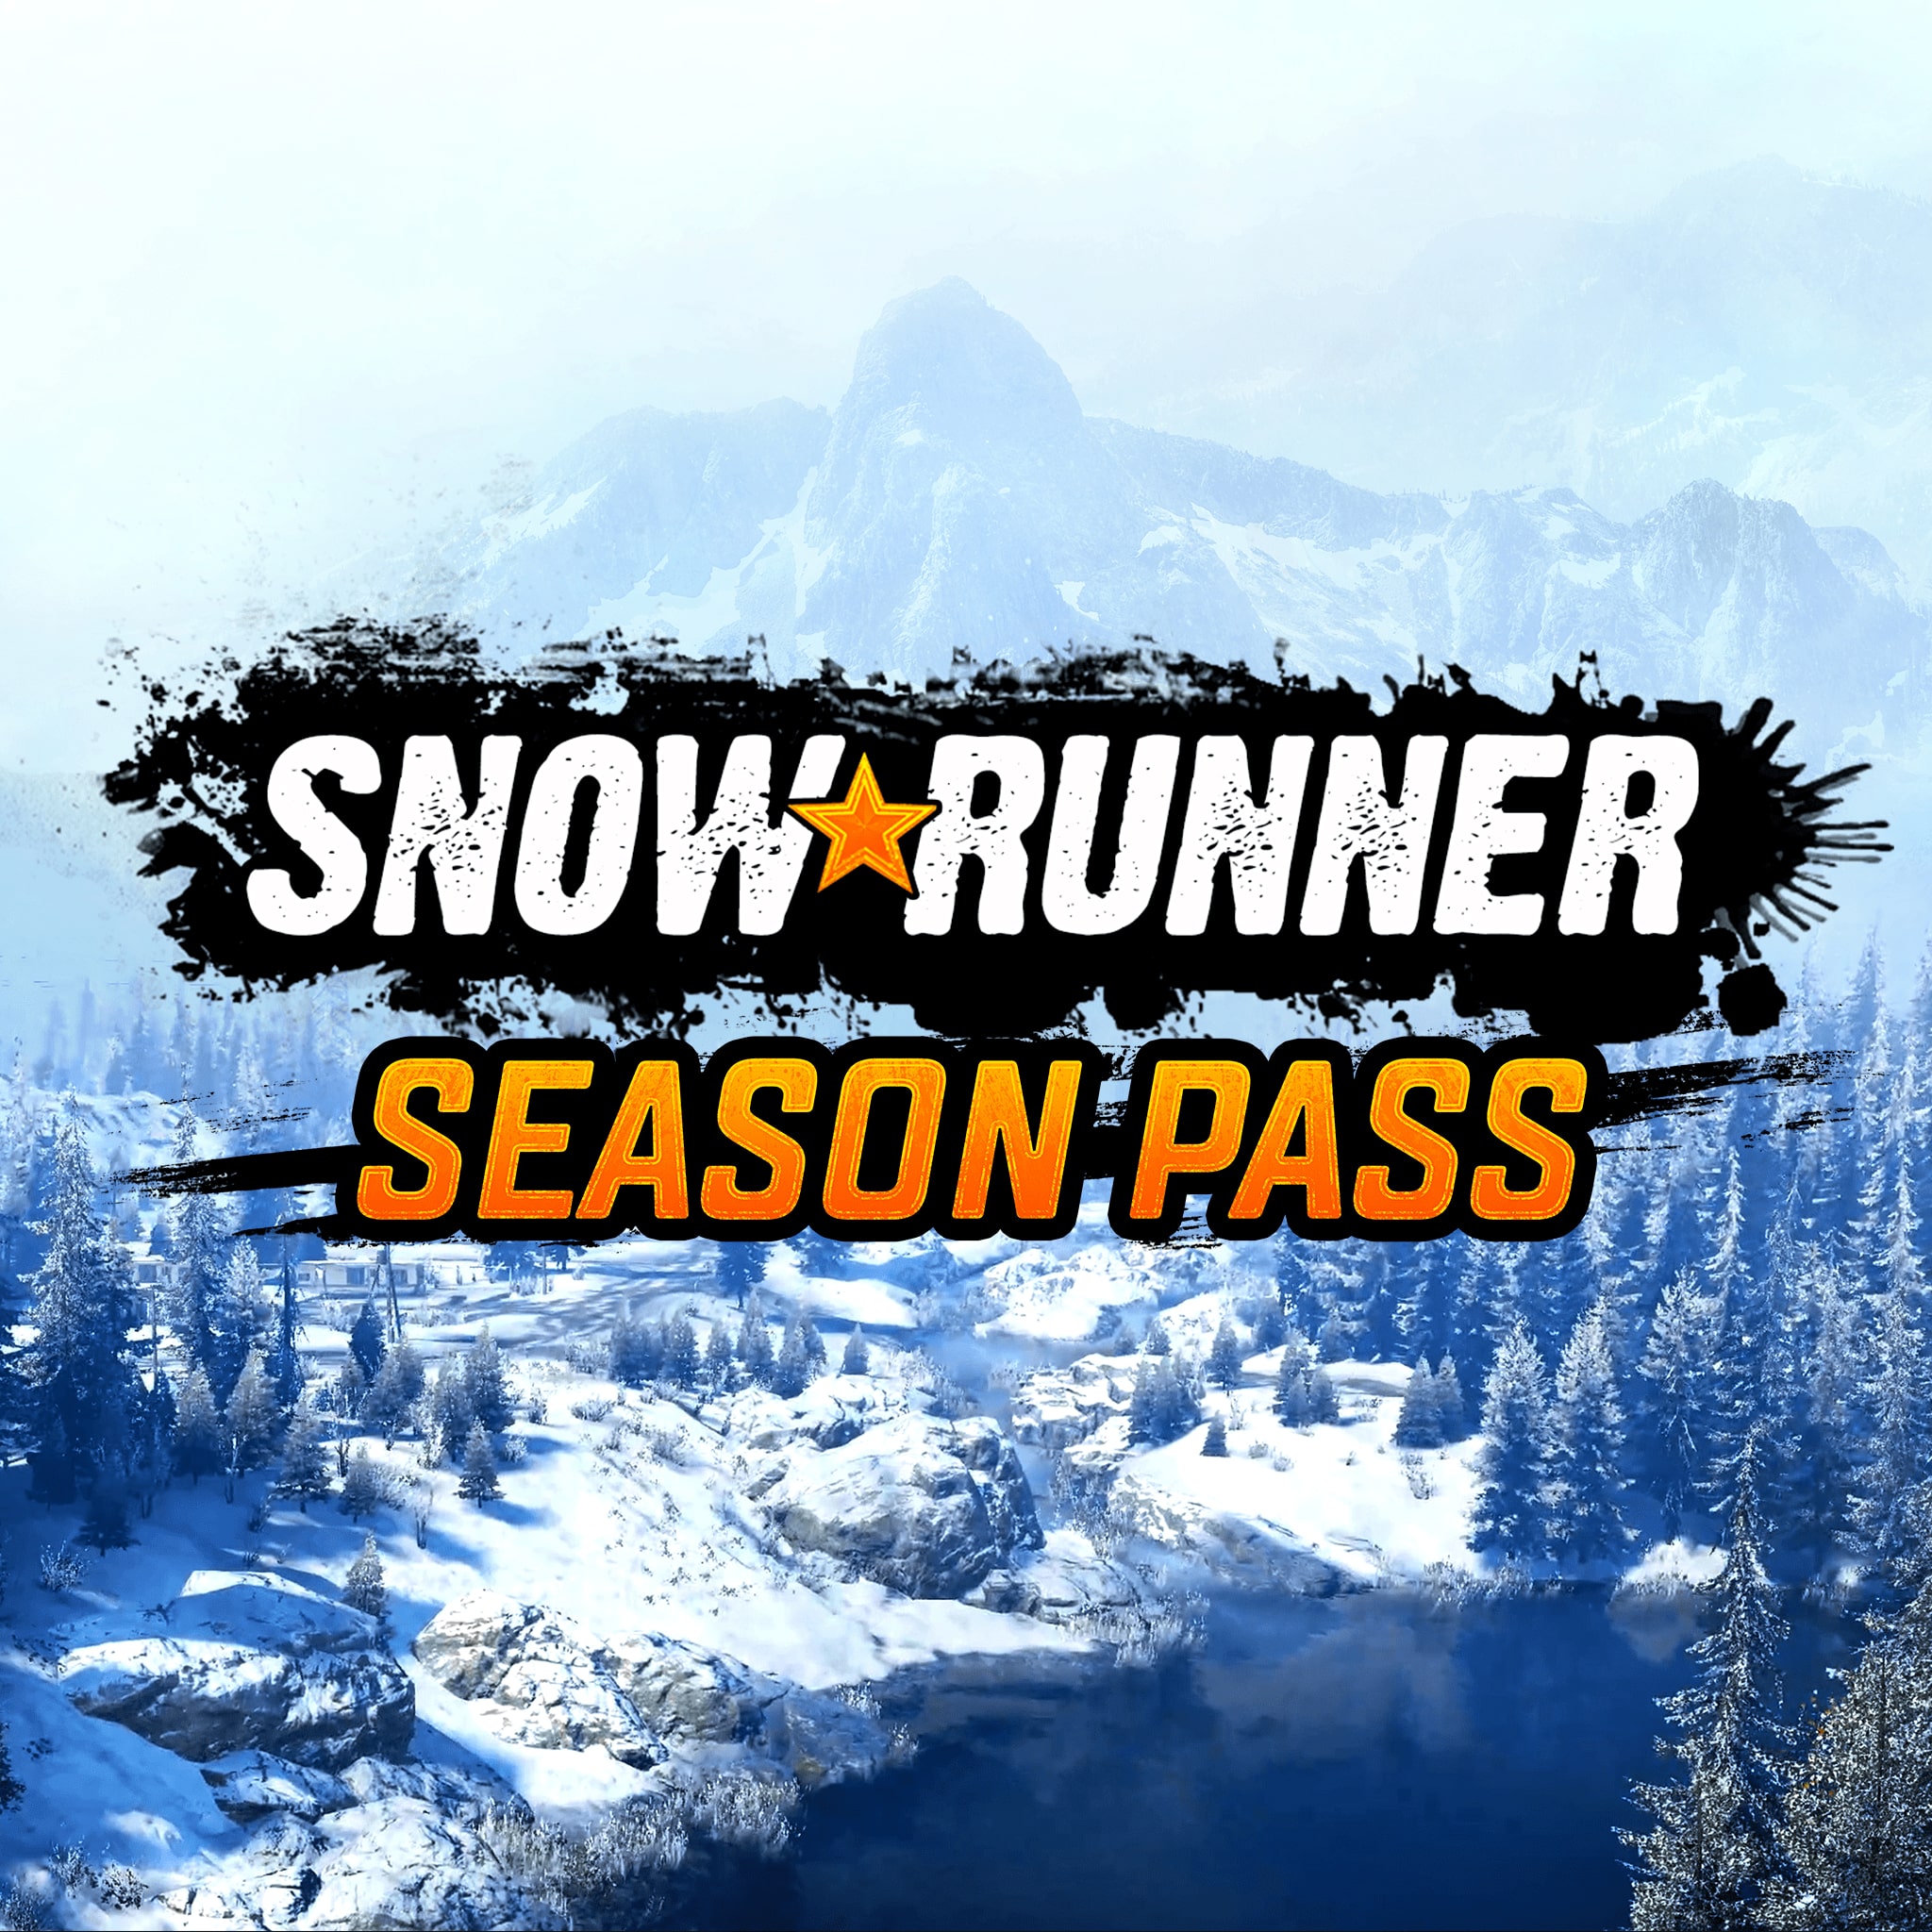 snowrunner ps4 playstation store